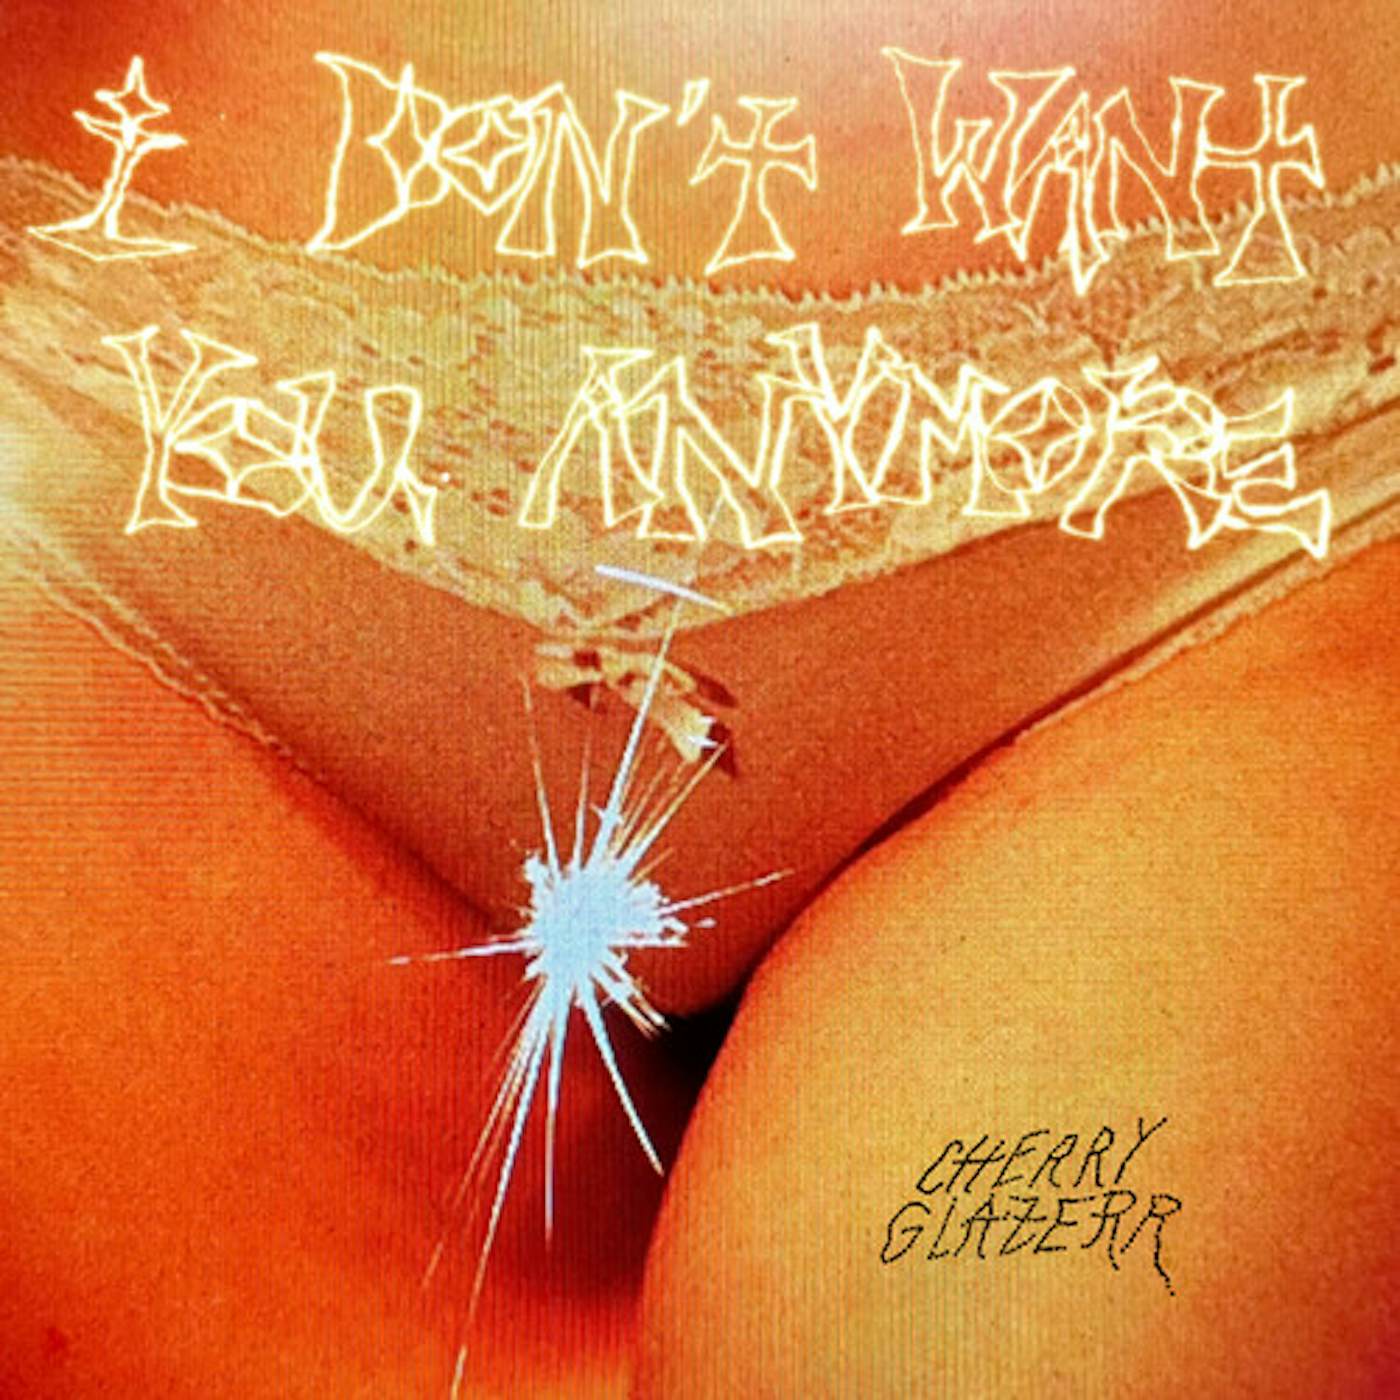 Cherry Glazerr I DON'T WANT YOU ANYMORE CD